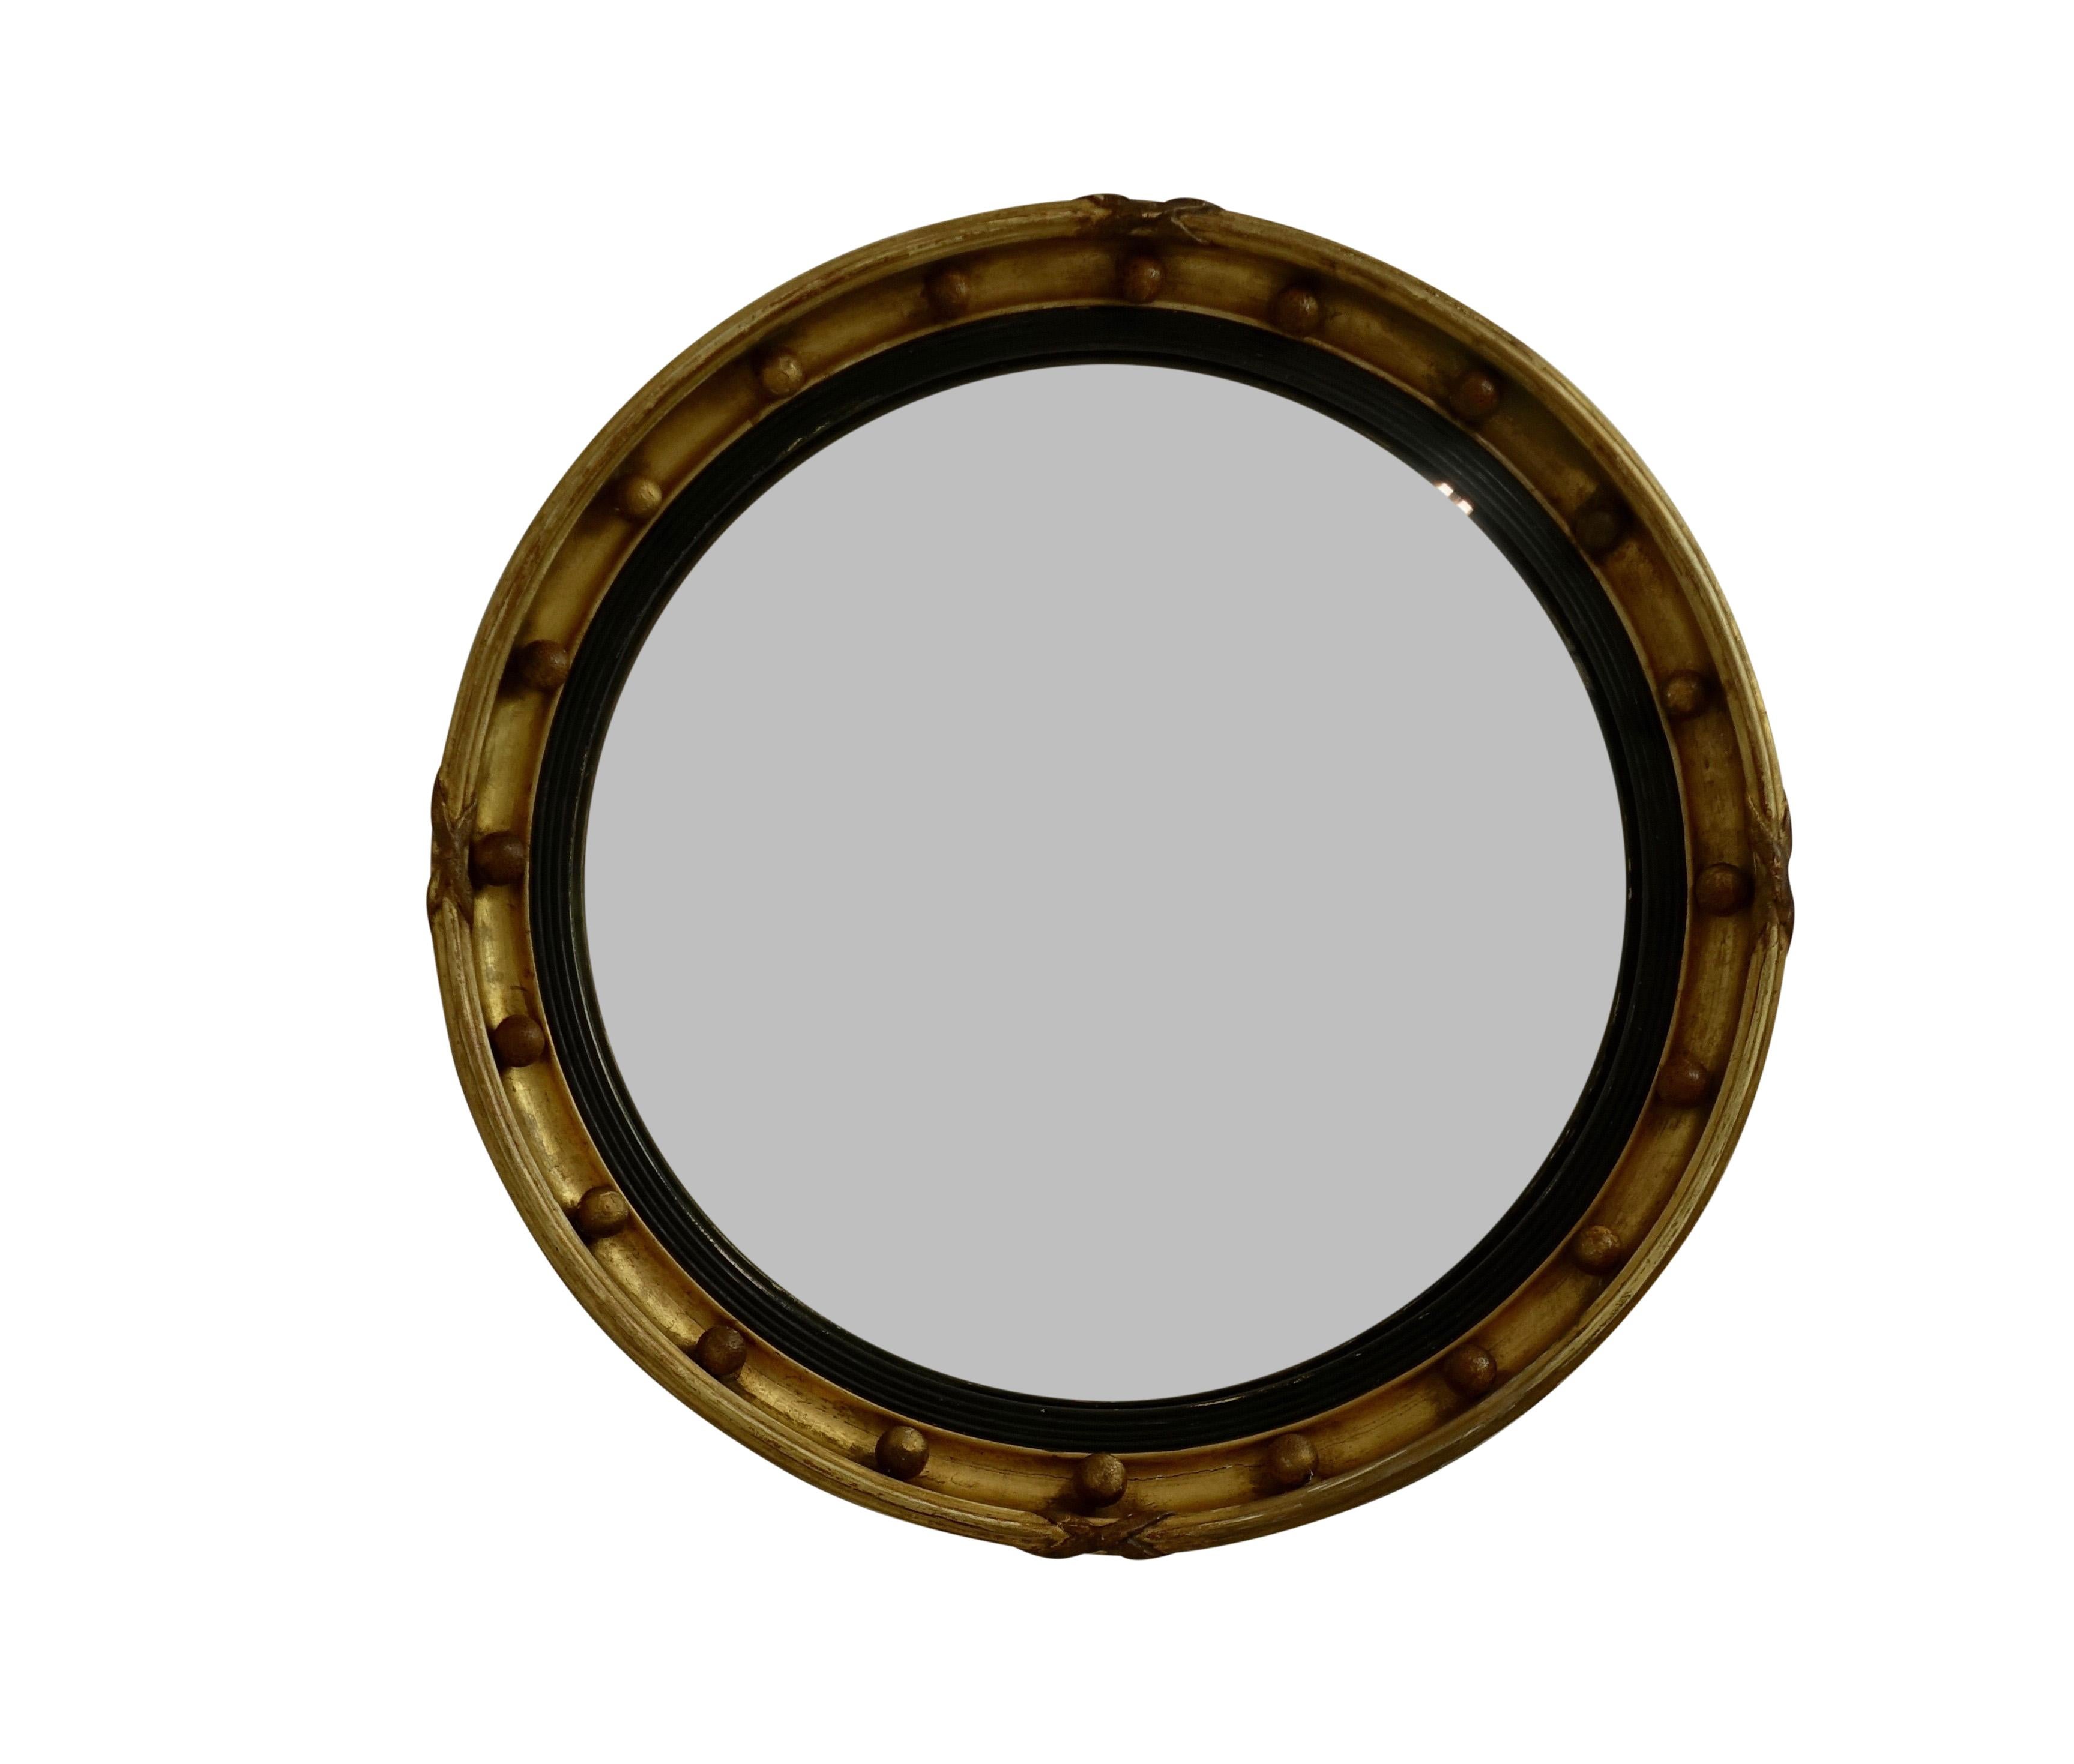 Antique Regency period gilt convex mirror with ebonized reeded inner molding and ribbon bound edge in original finish and original mirror with marring and scratches. English, circa 1840.